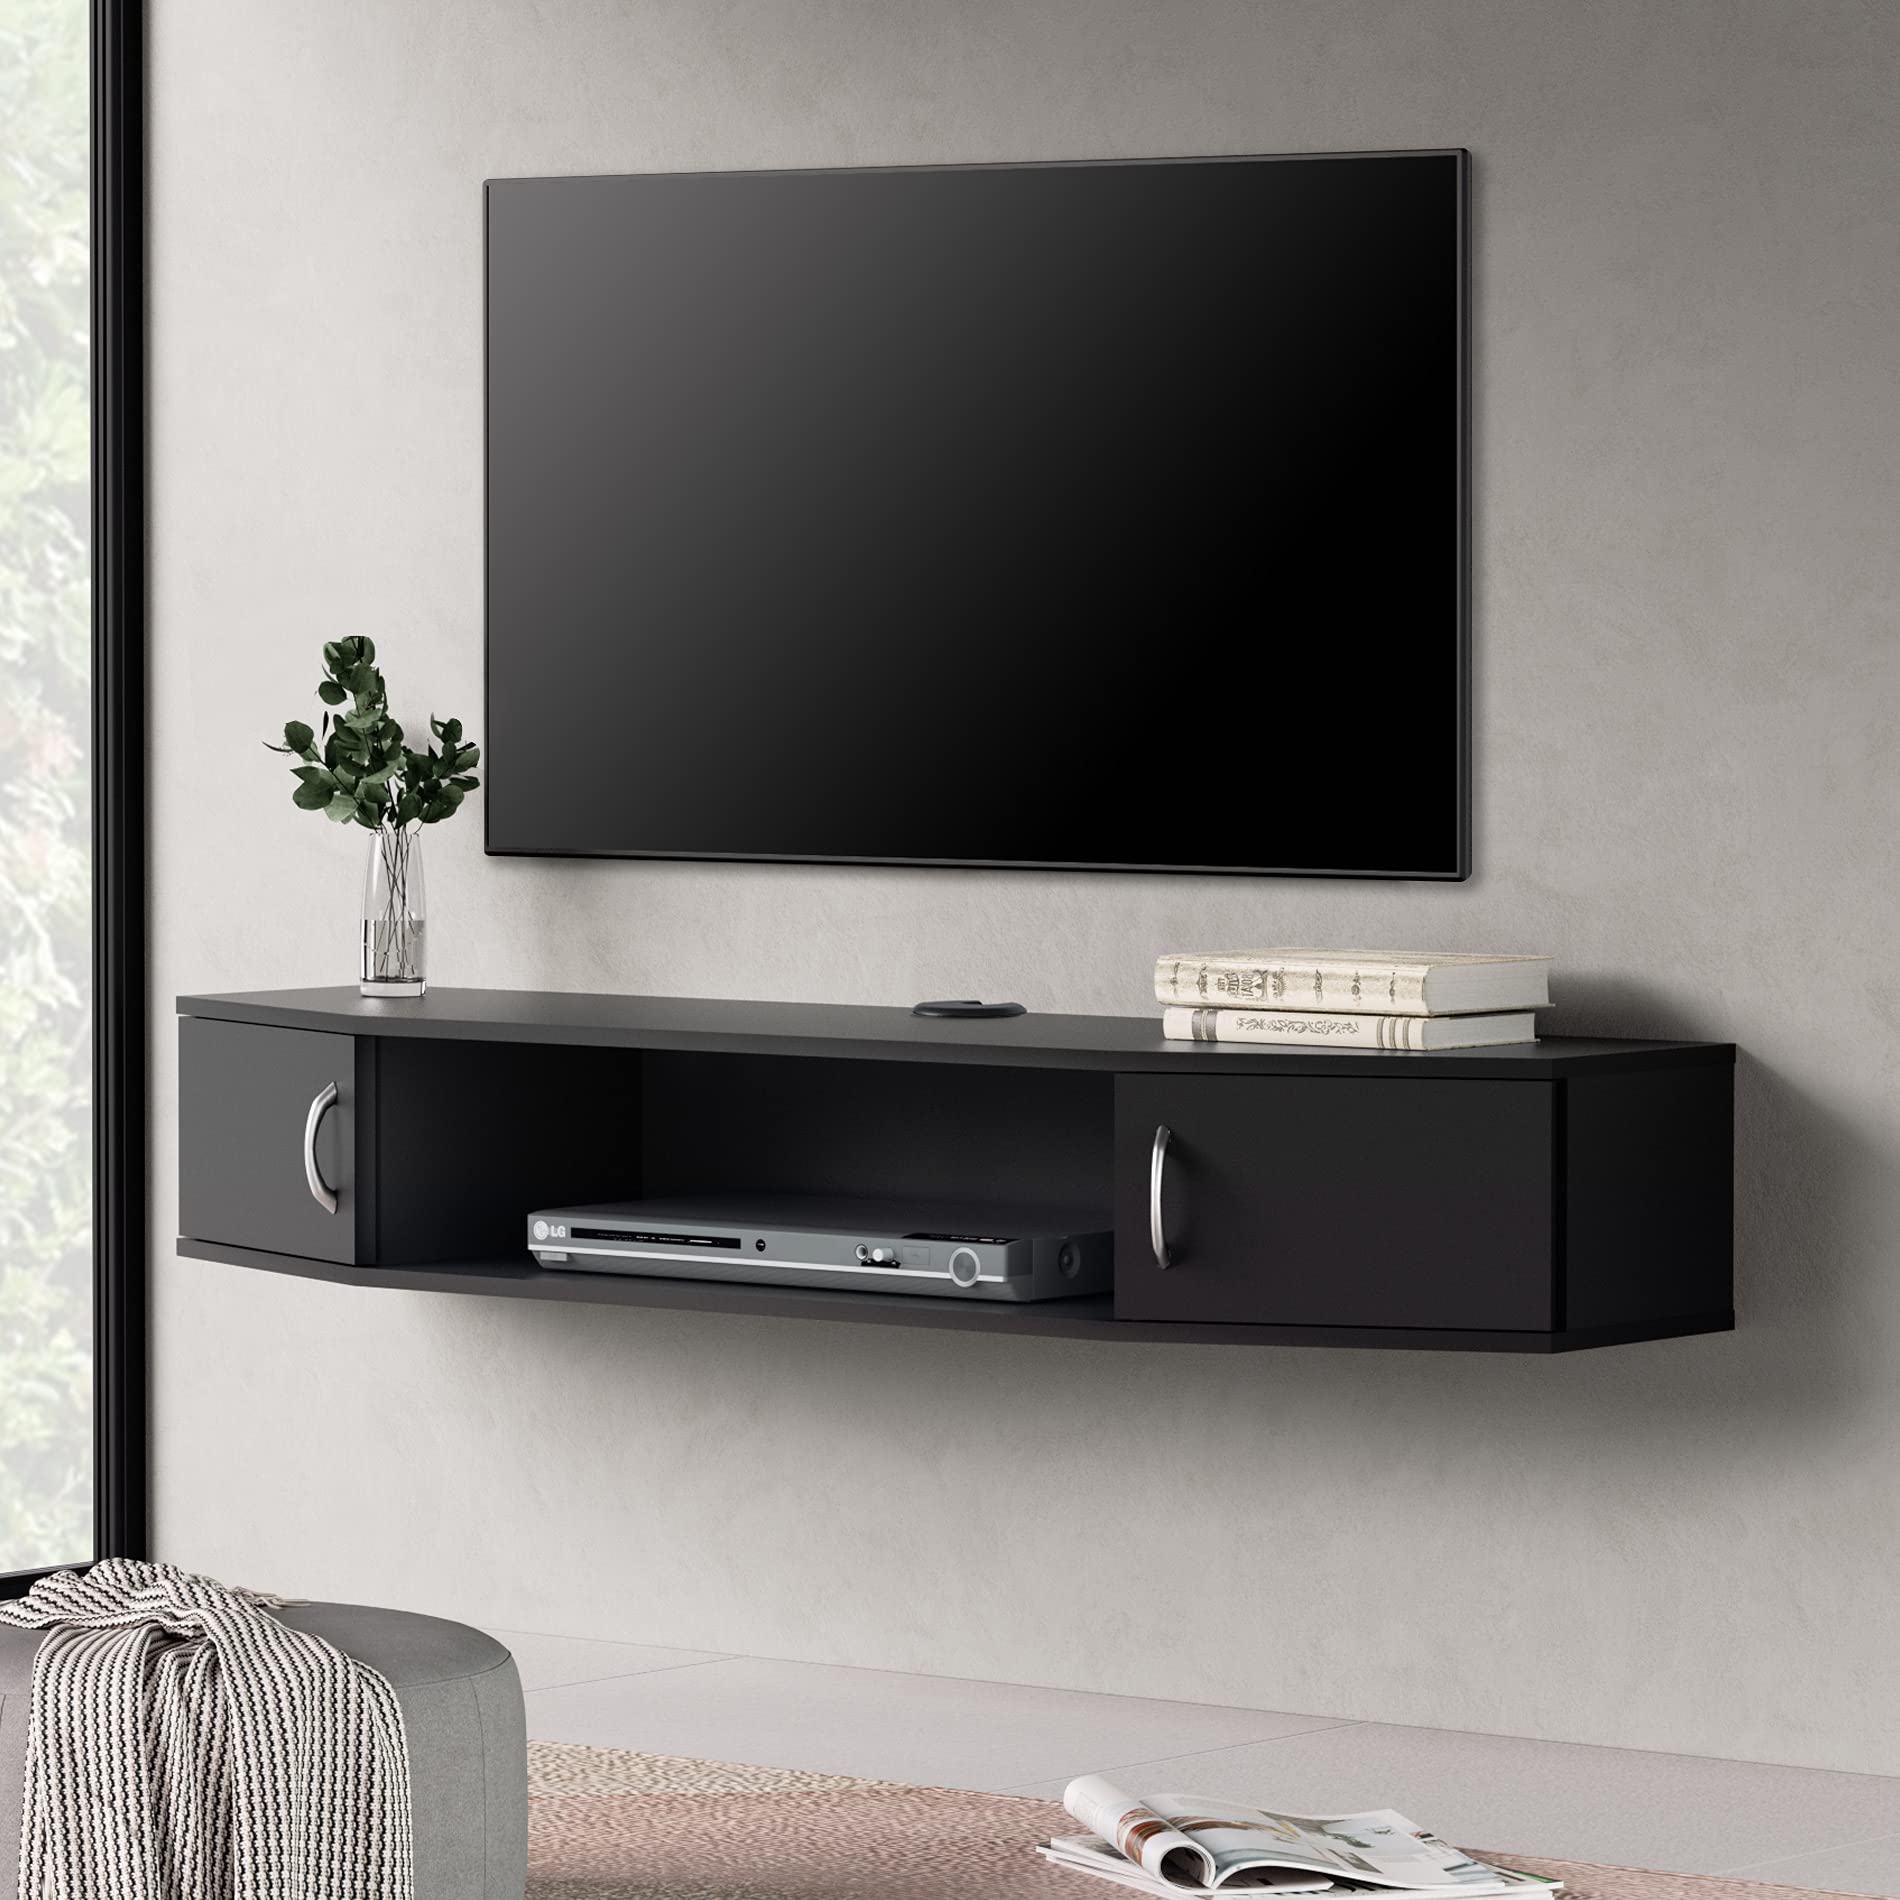 10 Unbelievable Wall Mounted Media Storage for 2023